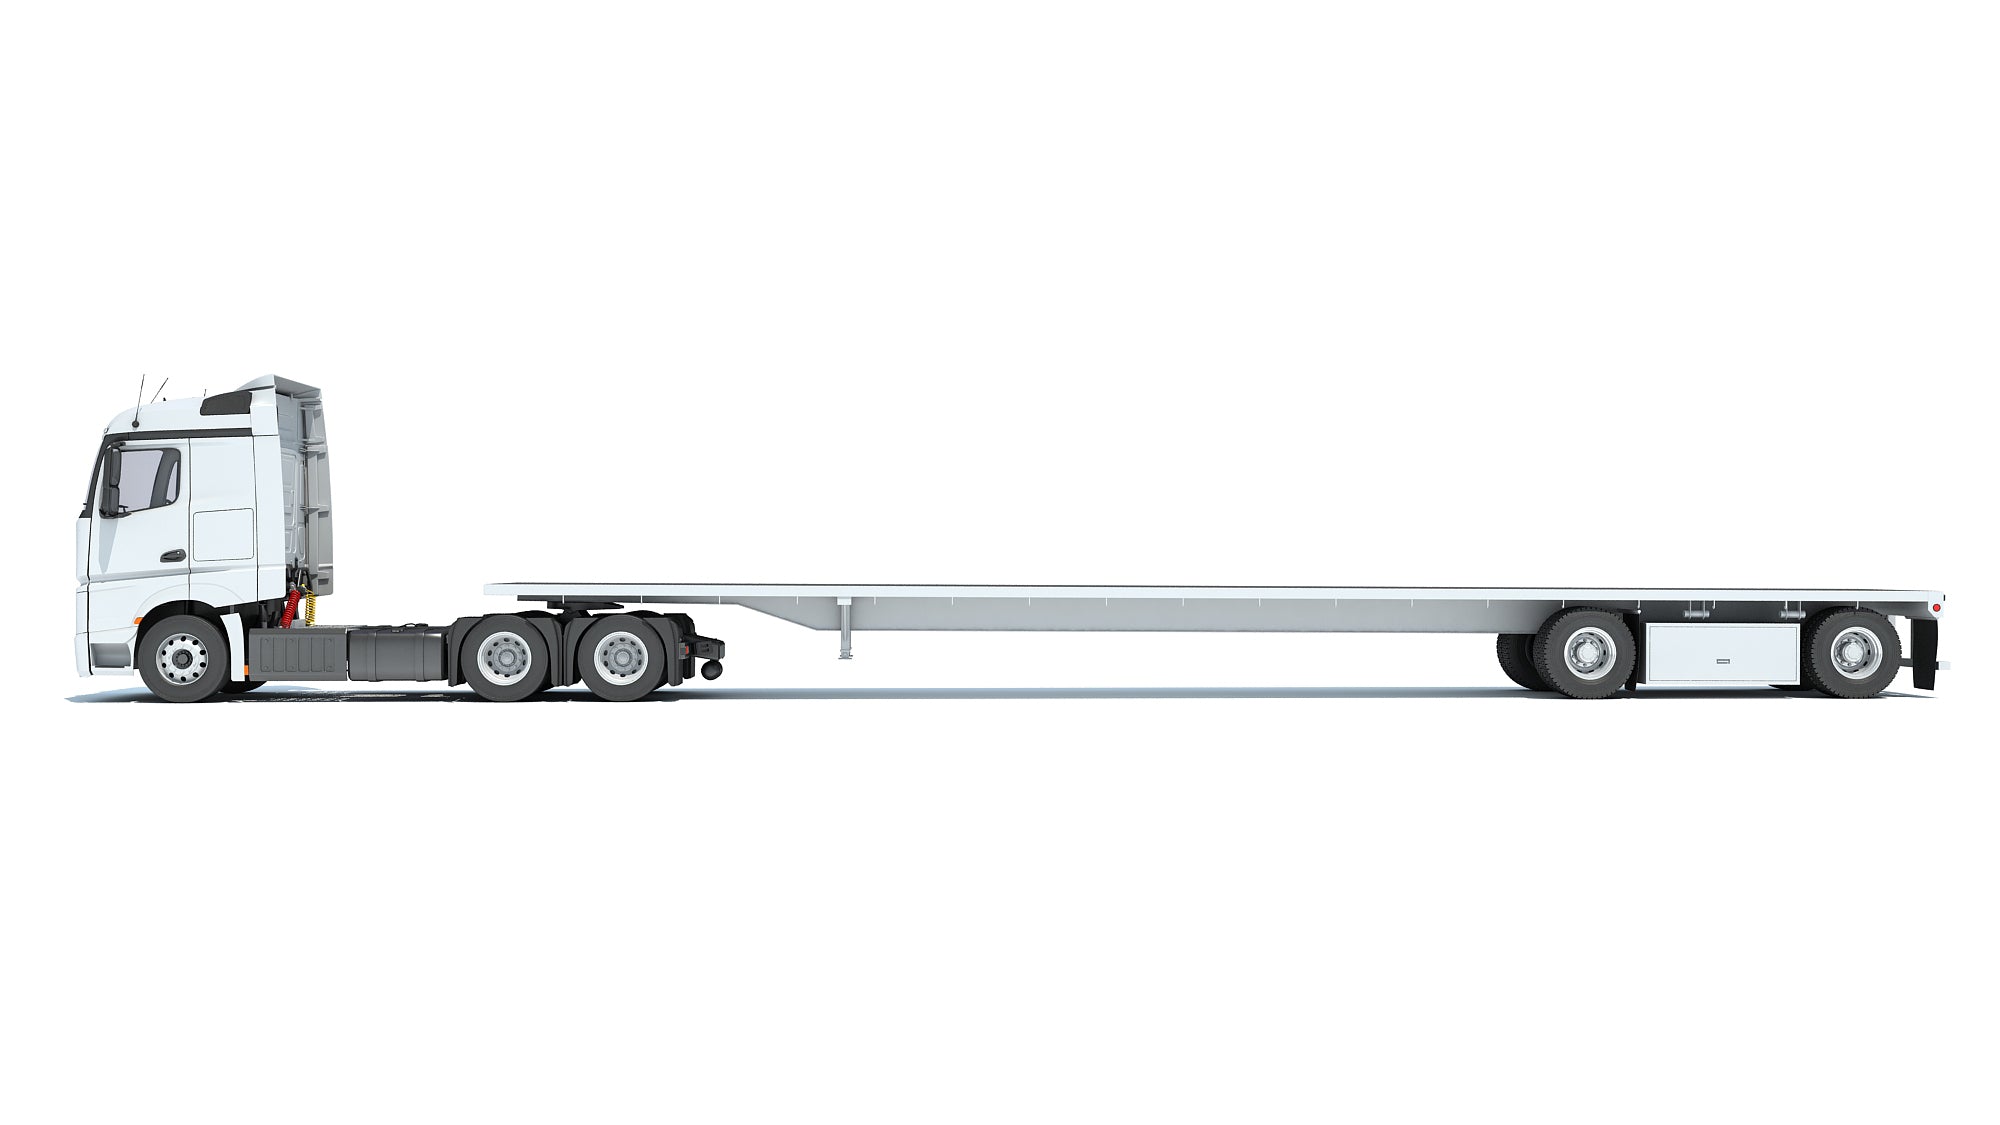 Truck with Flatbed Trailer